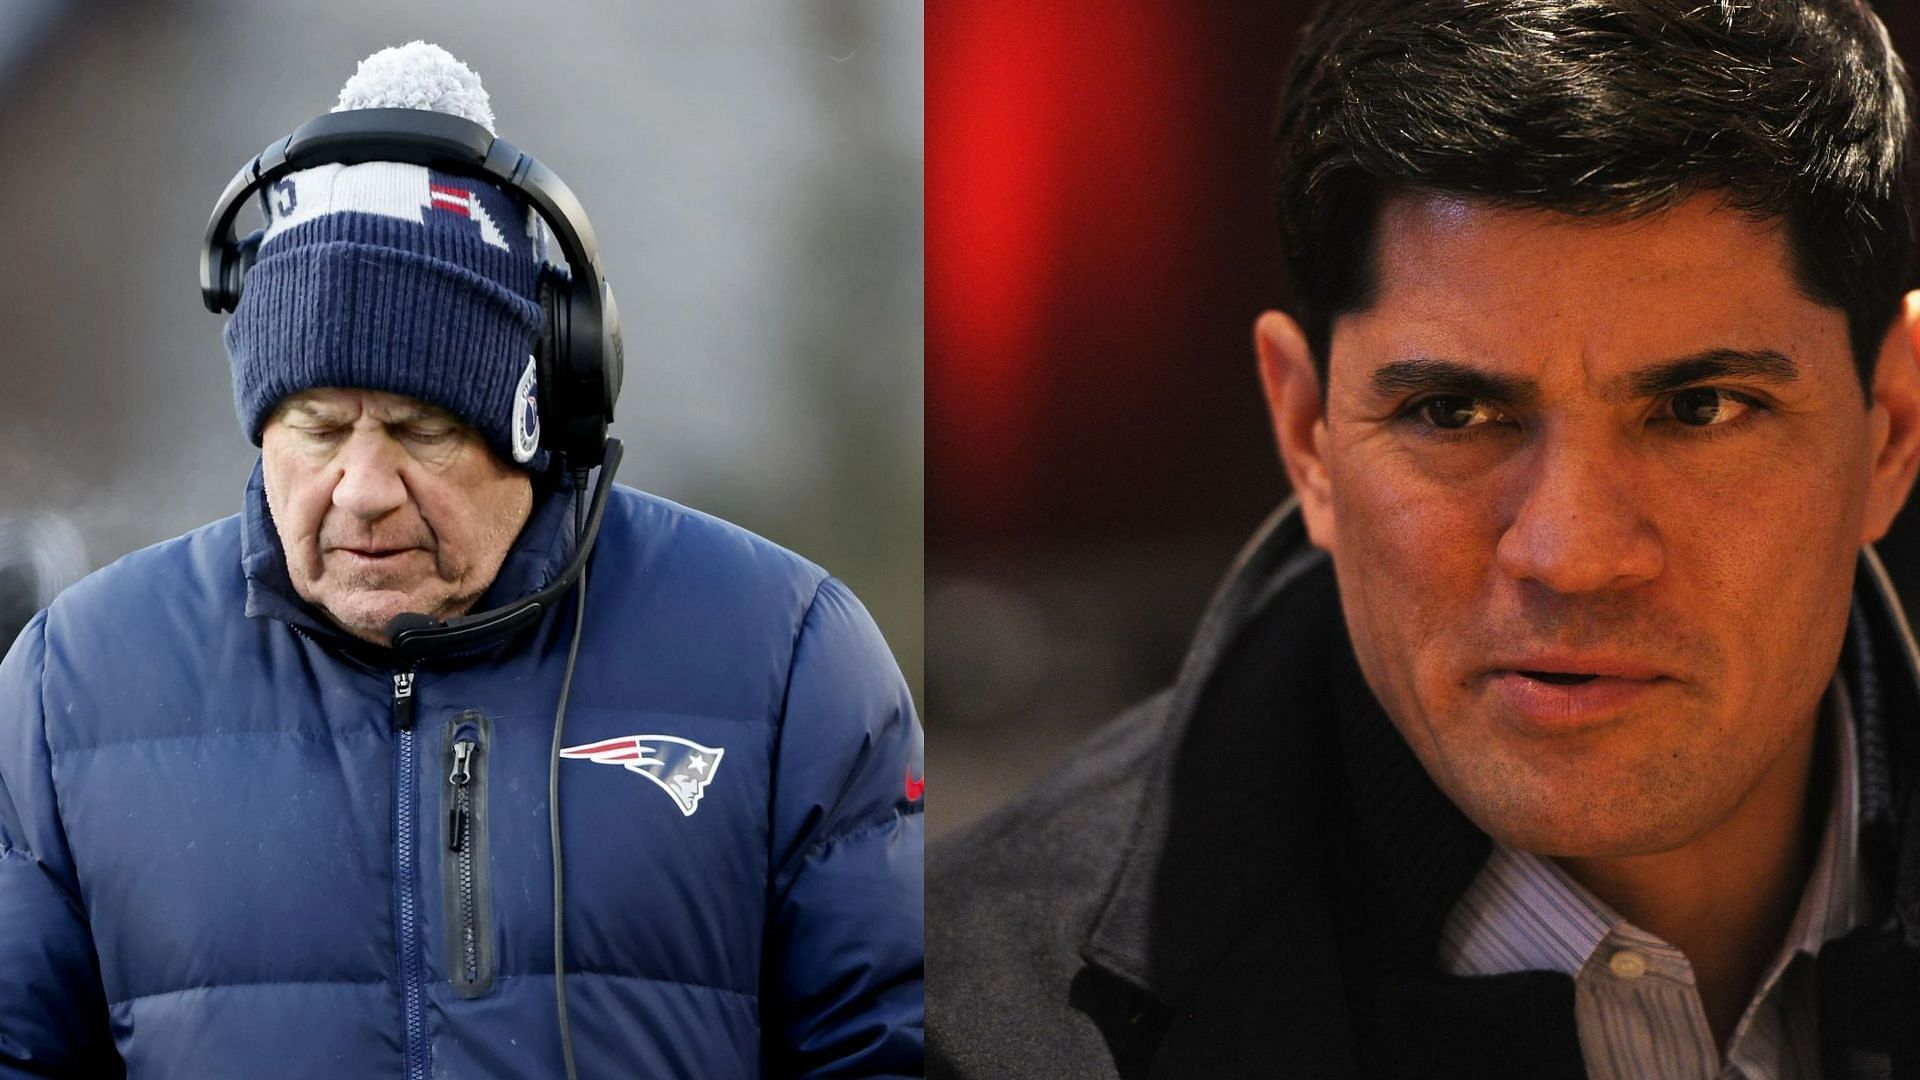 Bruschi has gone in on Belichick over his recent comments.